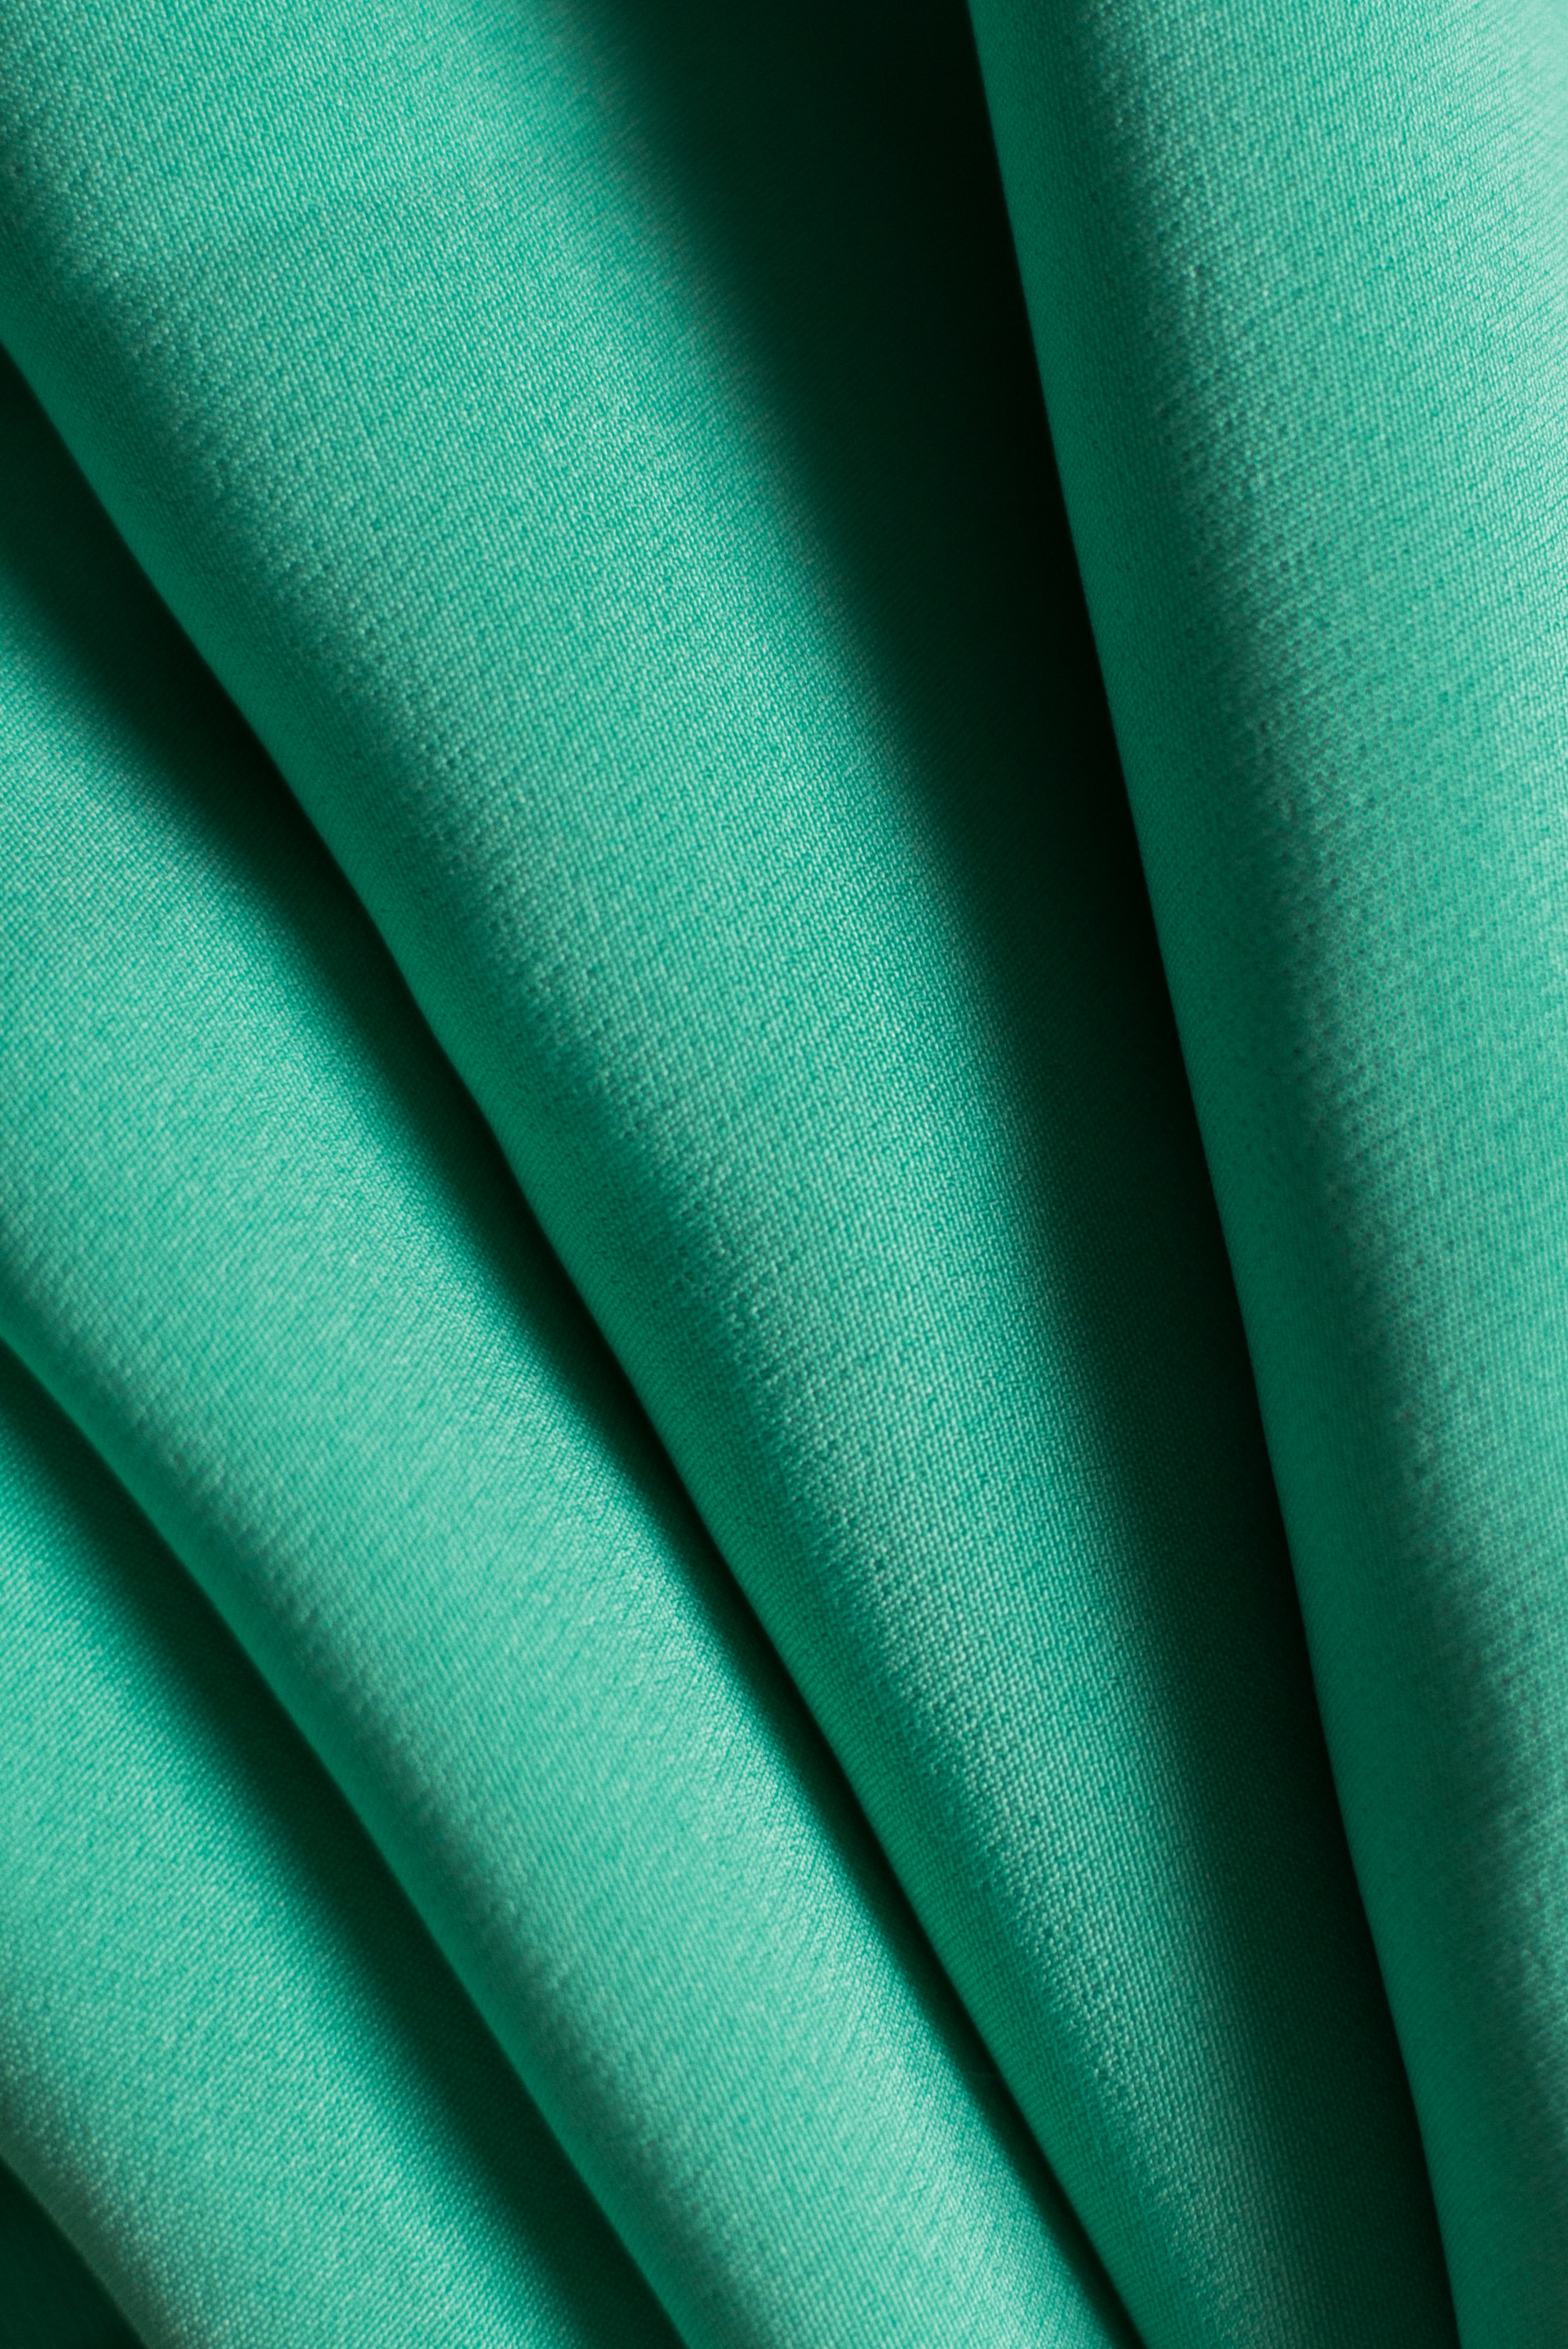 textures, green, texture, cloth, folds, pleating